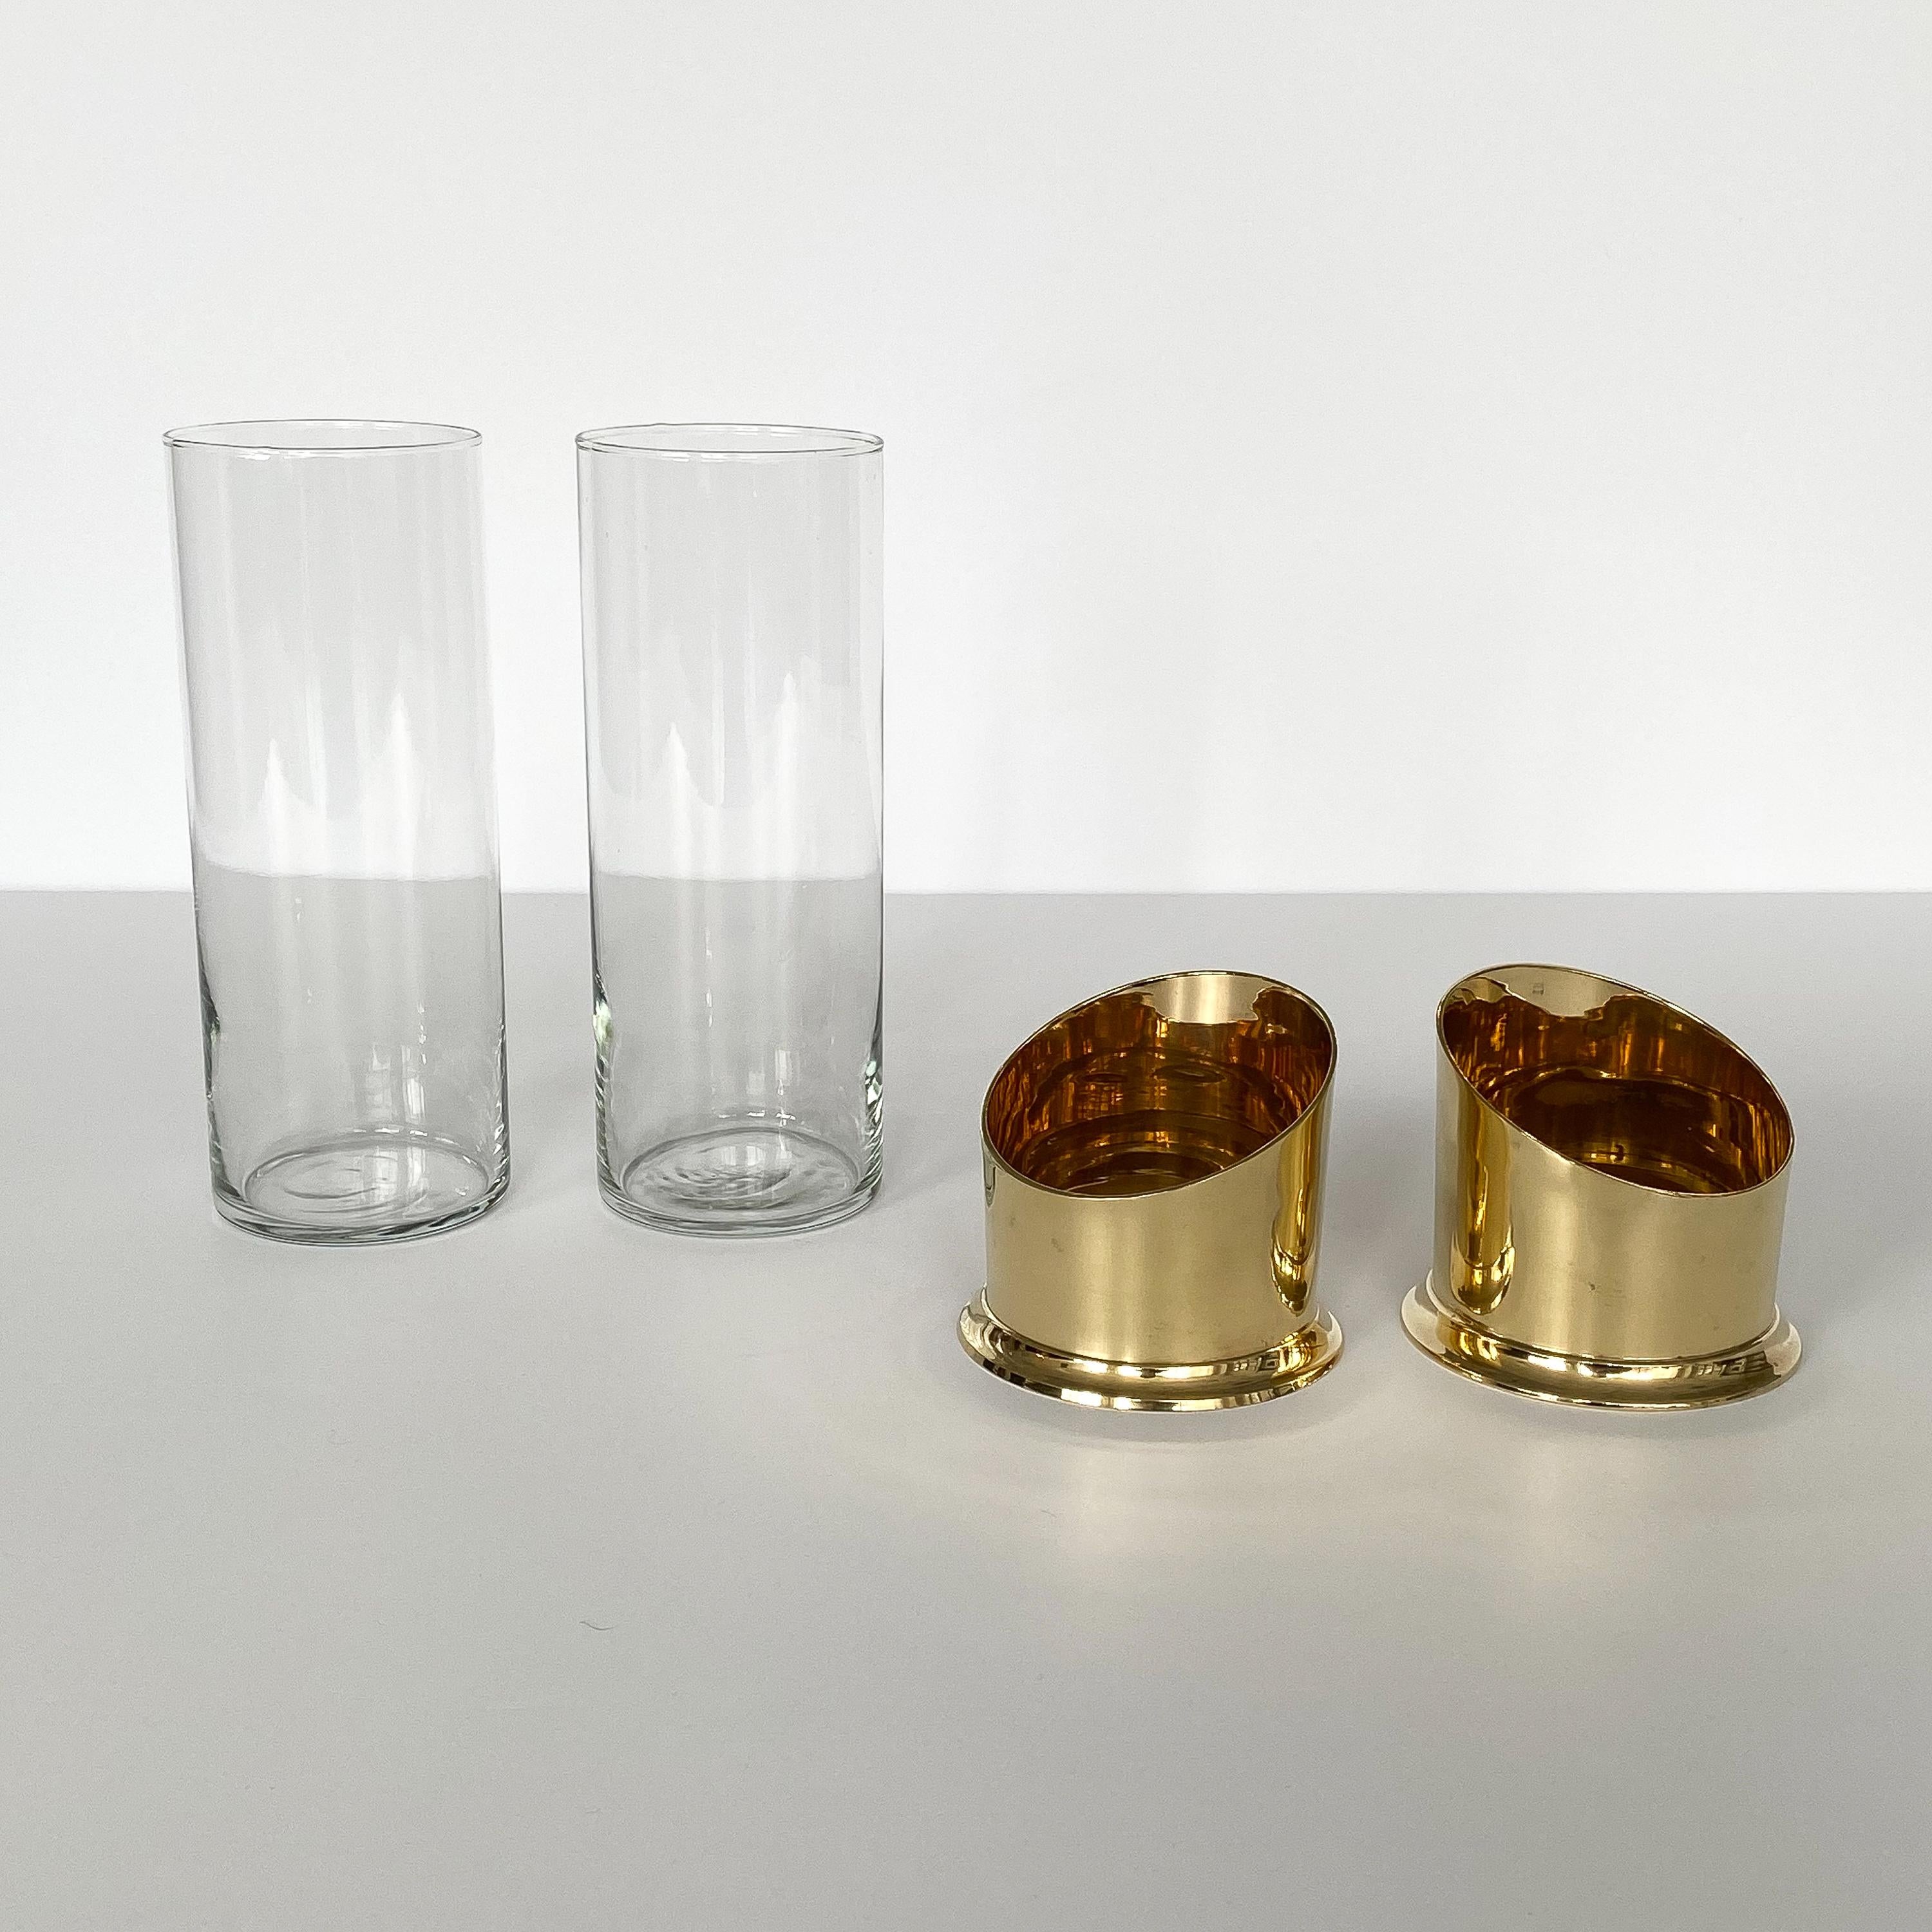 Pair of brass and glass hurricane candleholders or vases. Solid unlacquered brass bases with bias cut asymmetrical design. Bases hold glass hurricanes / vases. Glass is removable from base for easy cleaning. Glass opening 3.25